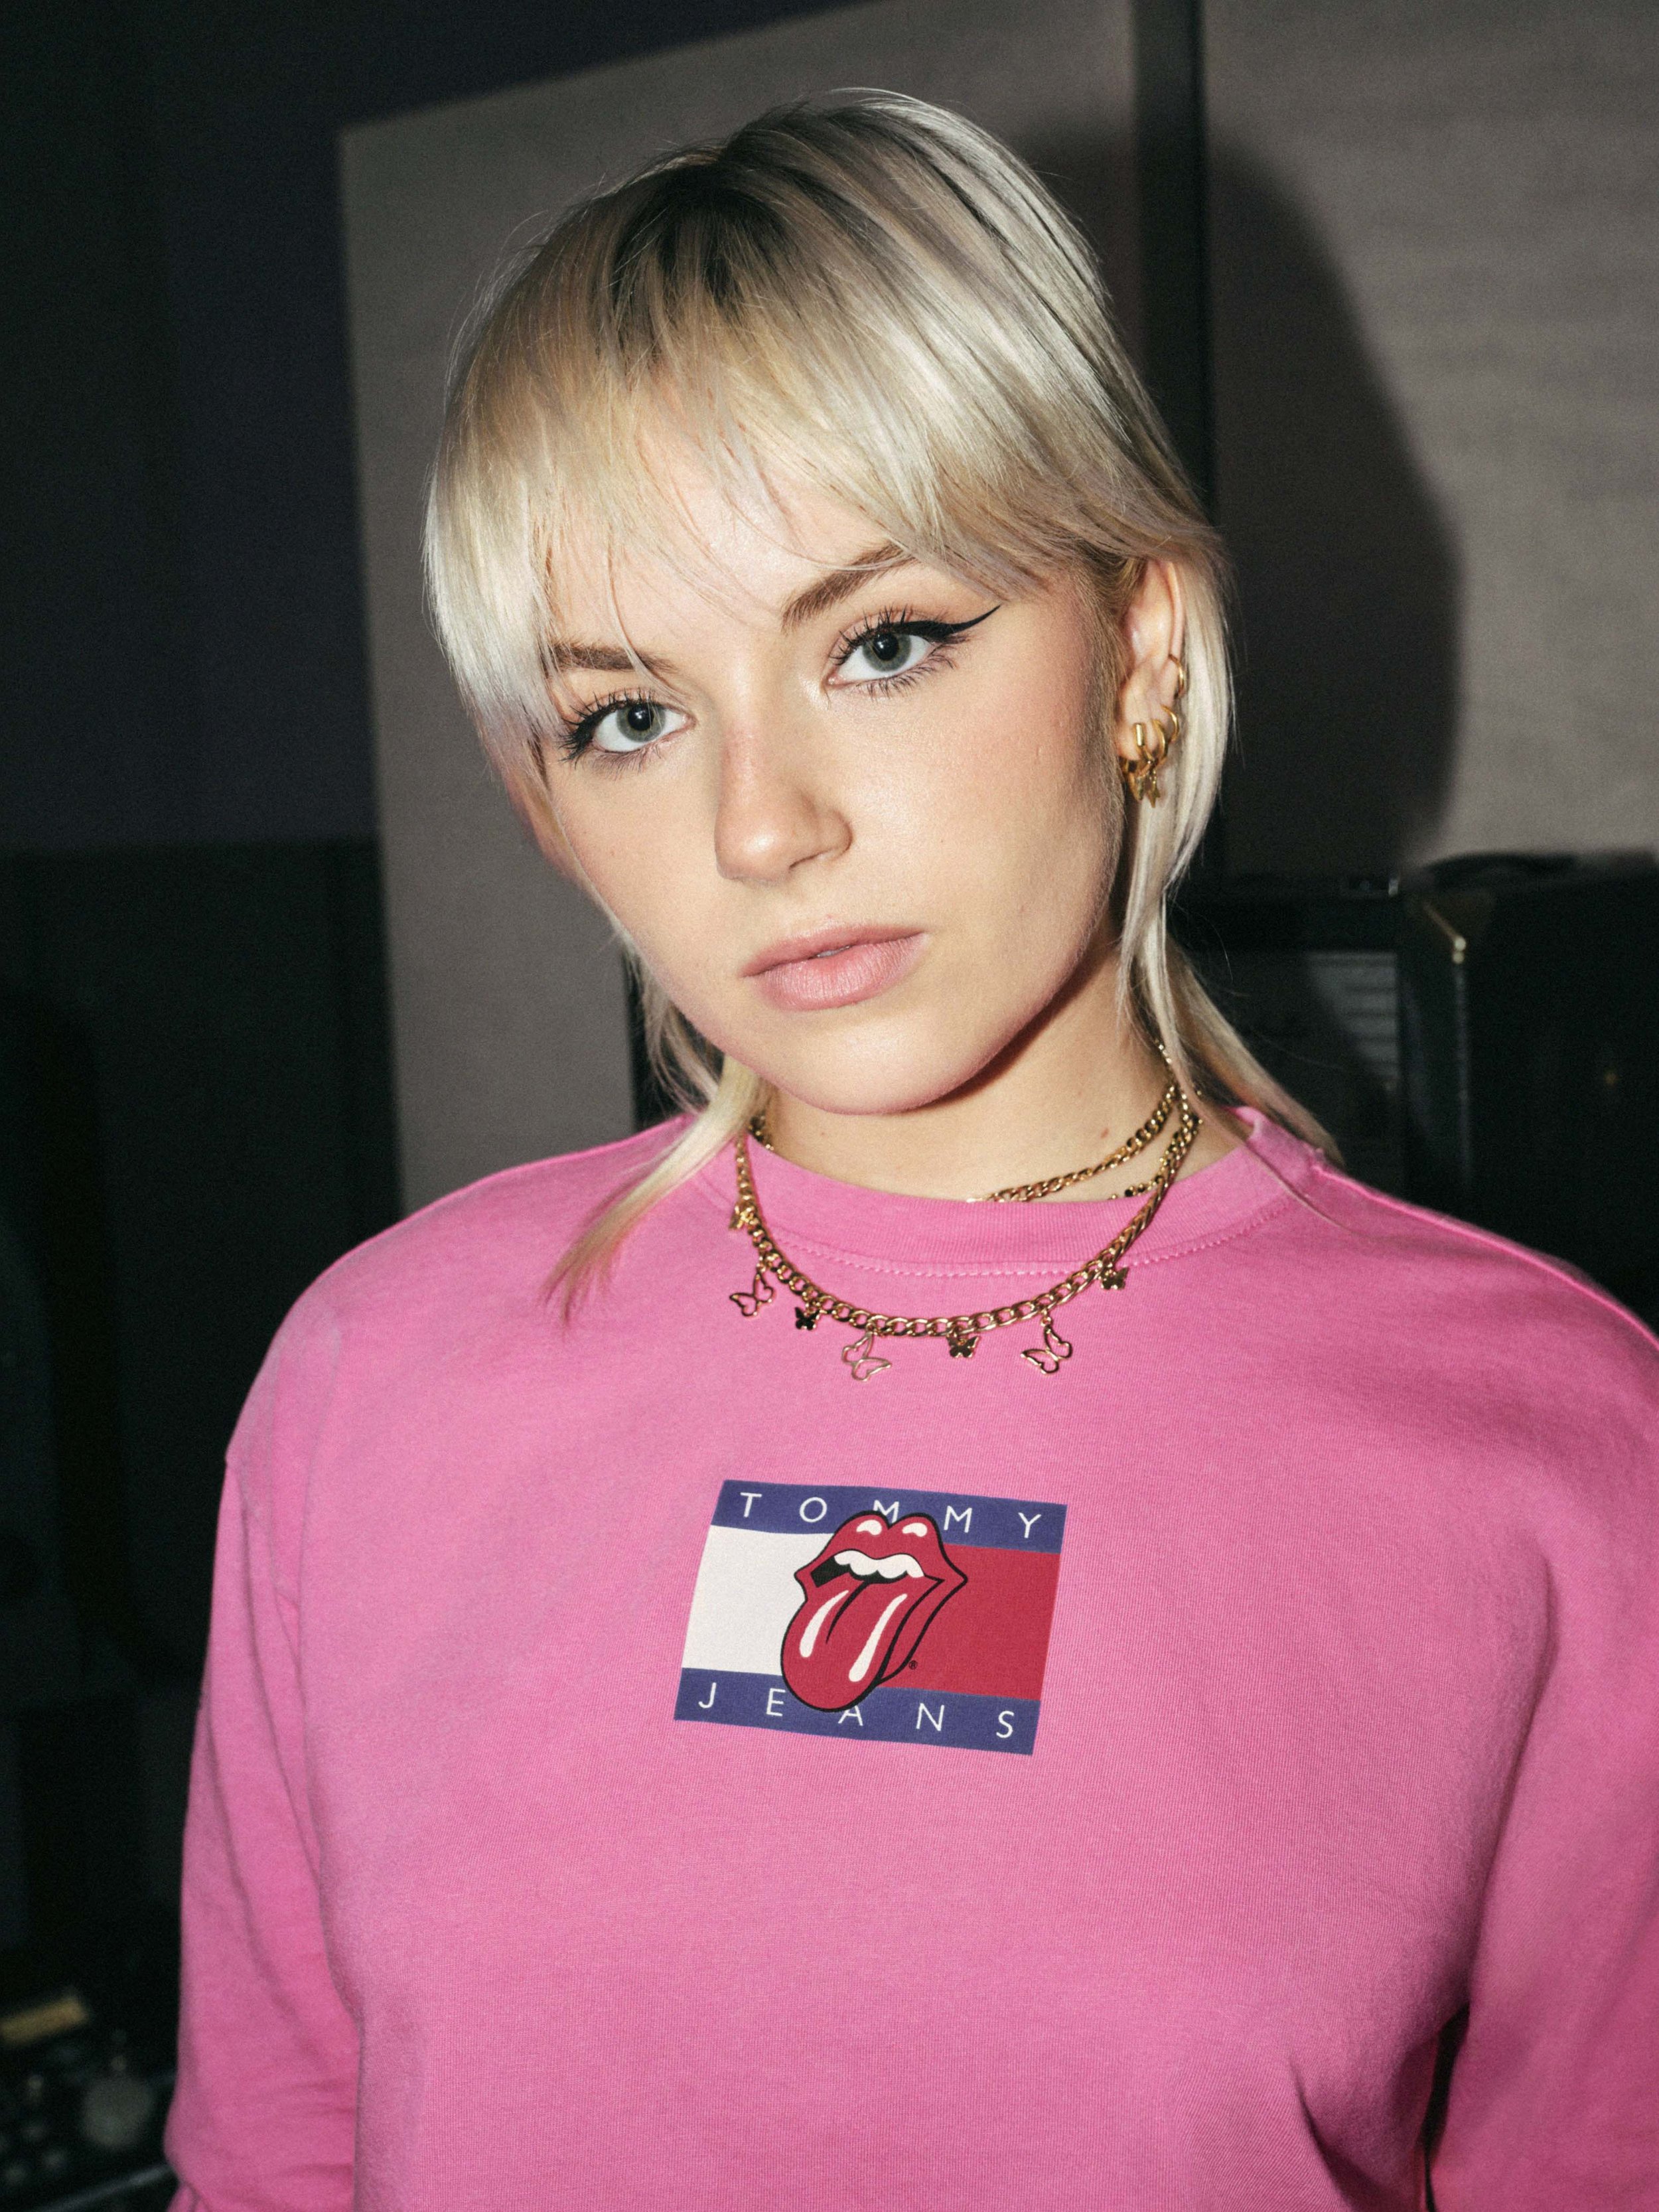 Tommy Jeans Celebrates The Brand's Music Connection With The Launch Of ...